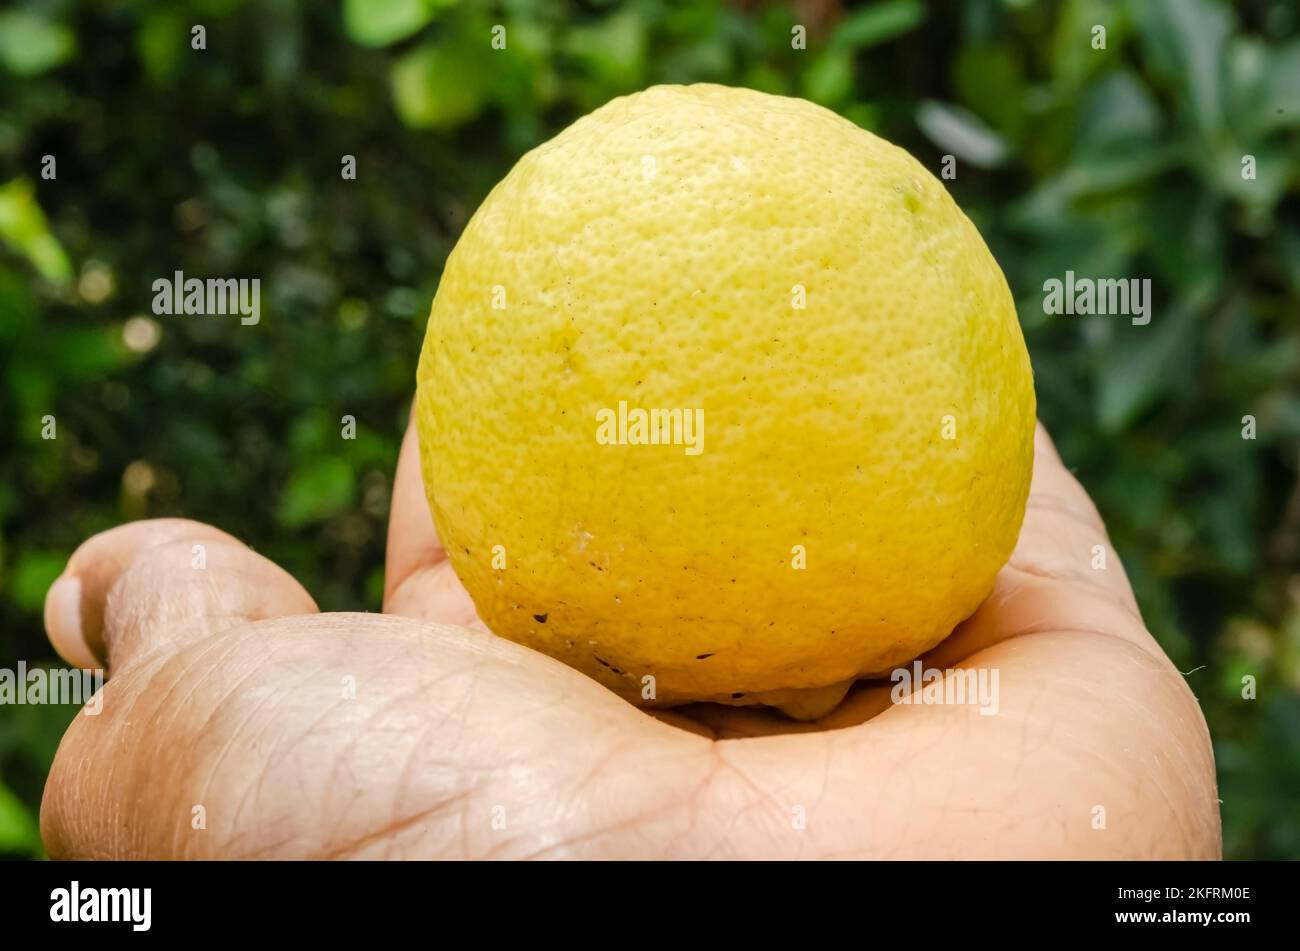 A Ripe Key Lime In A Hand Stock Photo